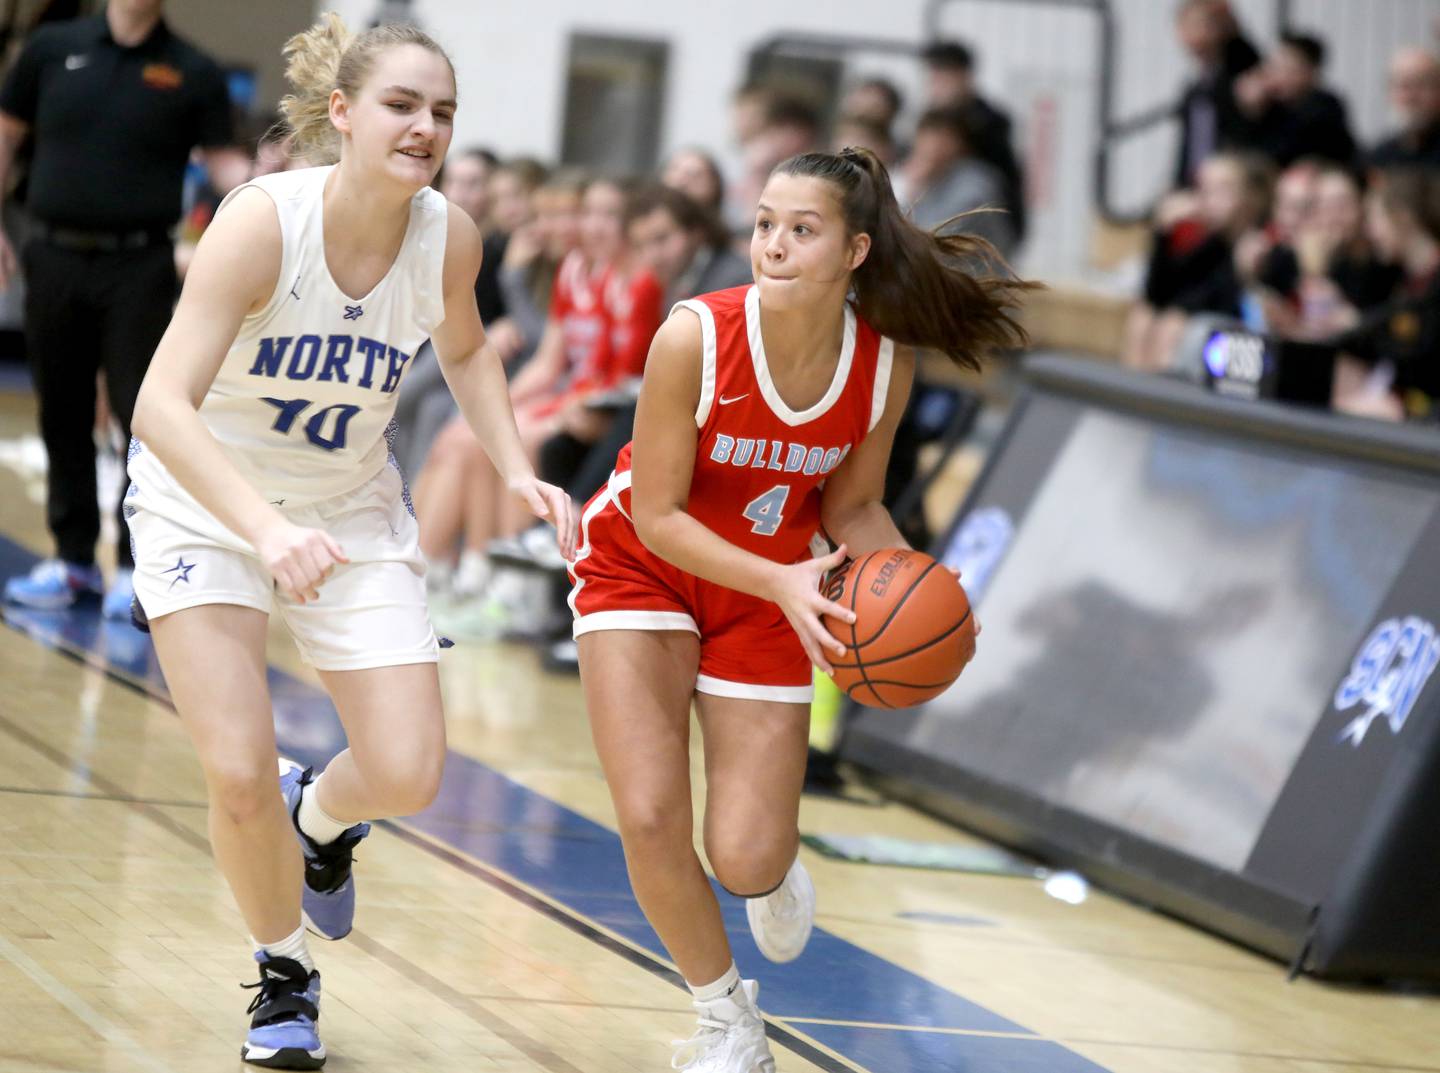 Batavia’s Addi Lowe (right) looks to pass the ball away from St. Charles North’s Elle Fuhr (left) during a game at St. Charles North on Tuesday, Feb. 7, 2023.